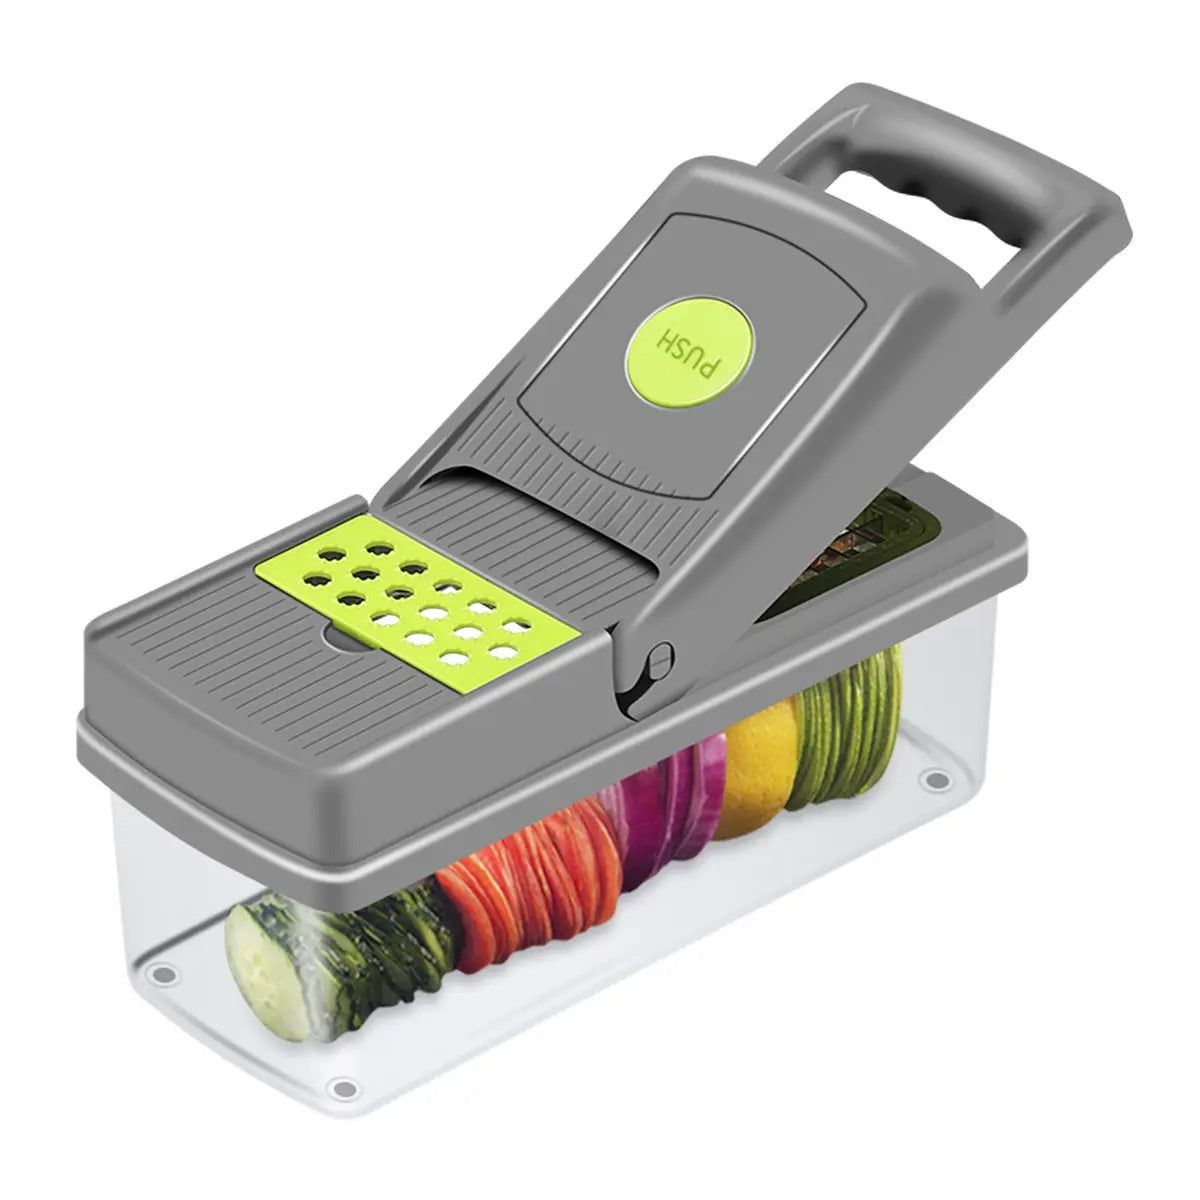 Vegetable Chopper Cutter,Mandoline Slicer Food Onion Veggie Dicer with  Container 